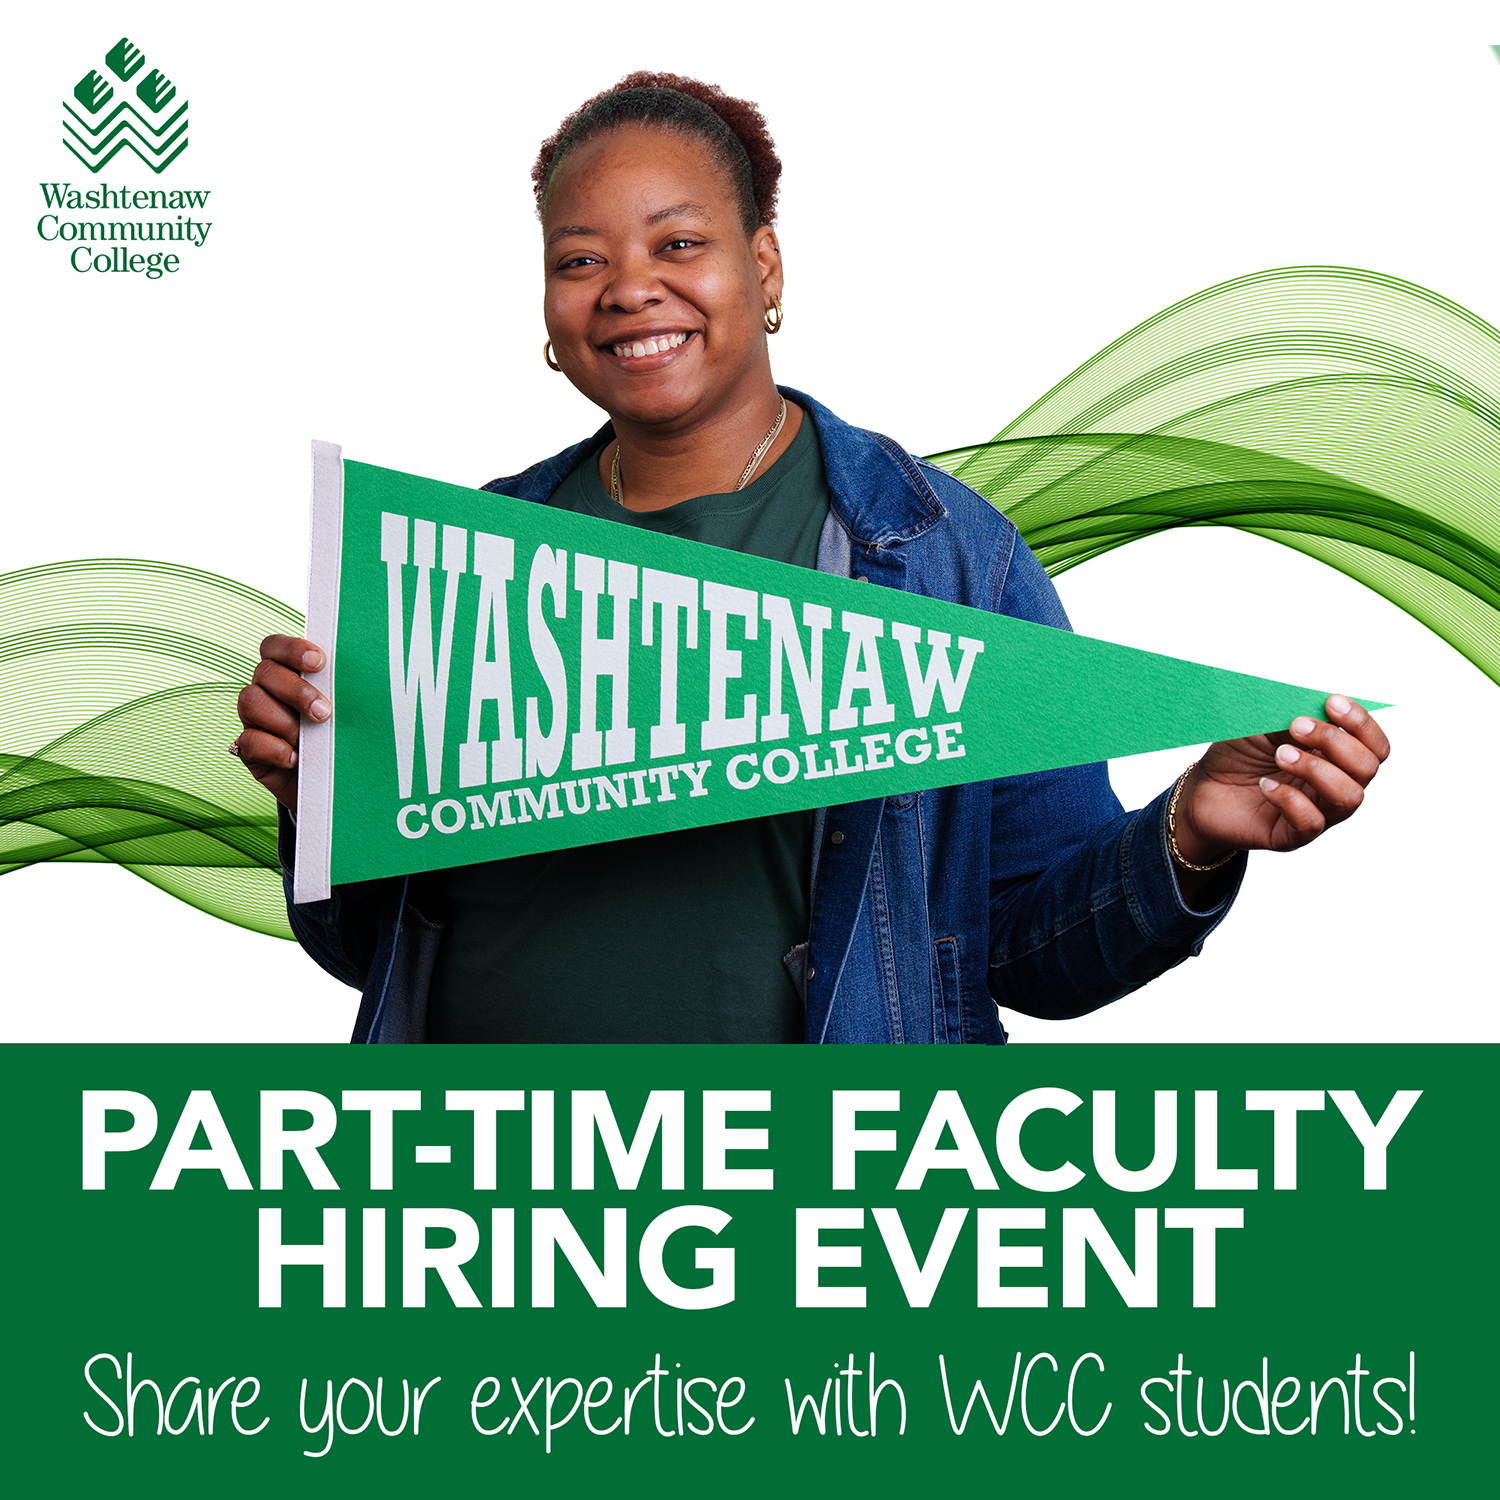 Part-time faculty hiring event